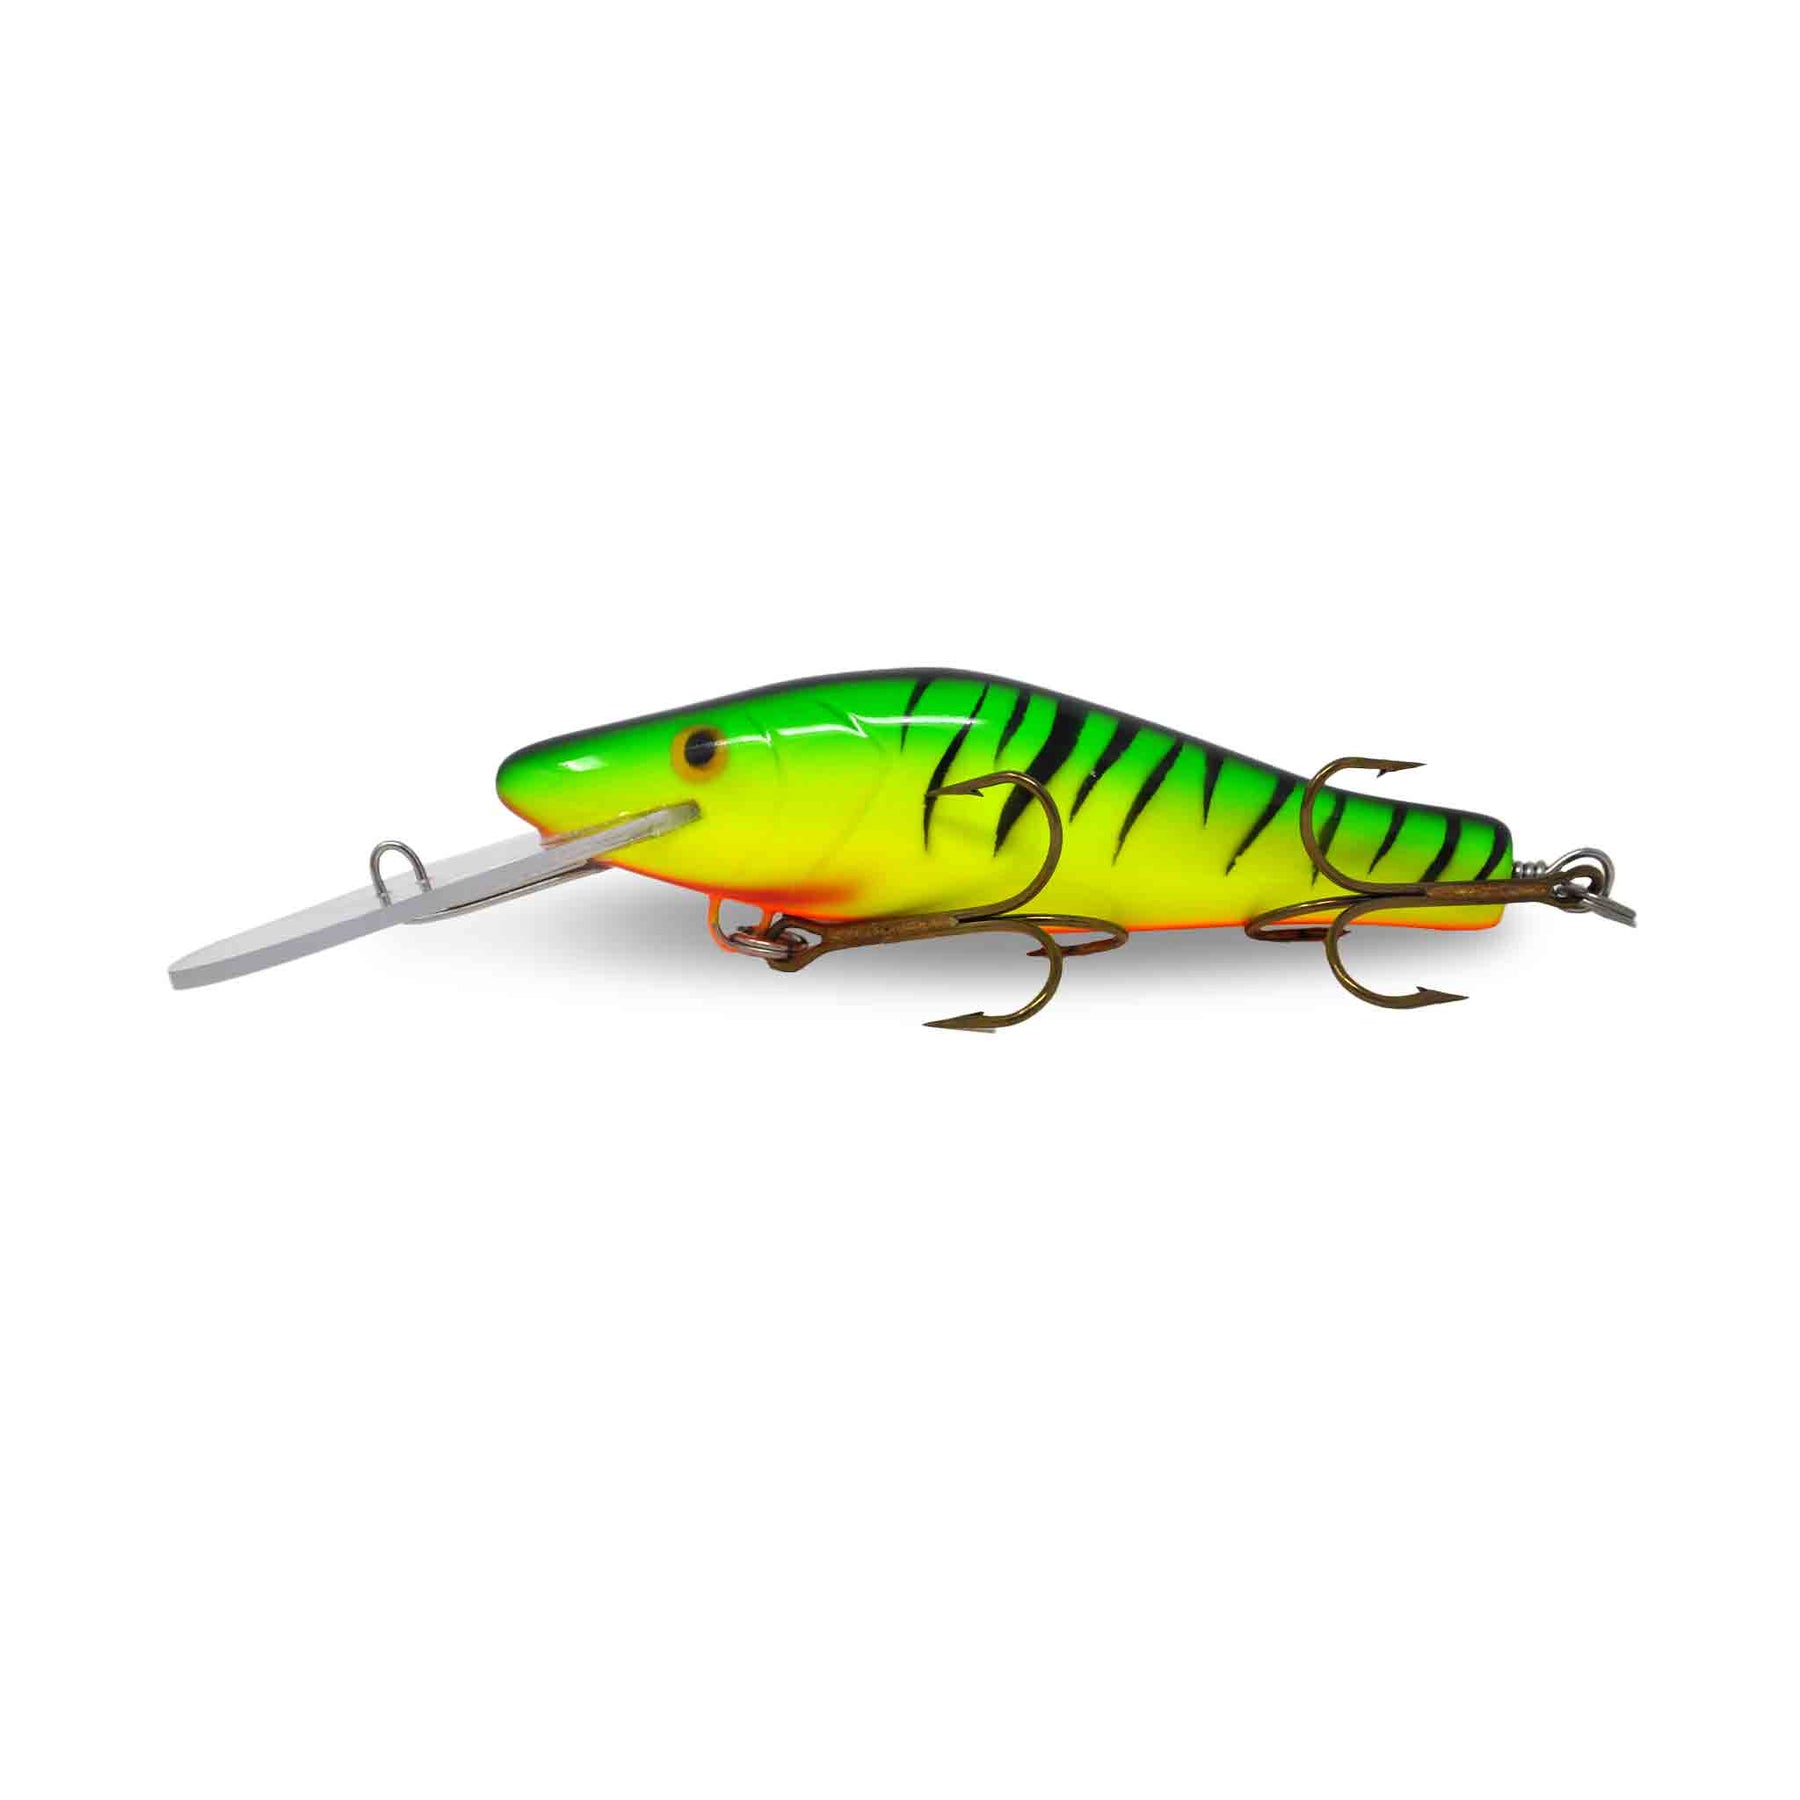 View of Crankbaits Legend lures Perch Bait Jr Crankbait Fire Tiger available at EZOKO Pike and Musky Shop